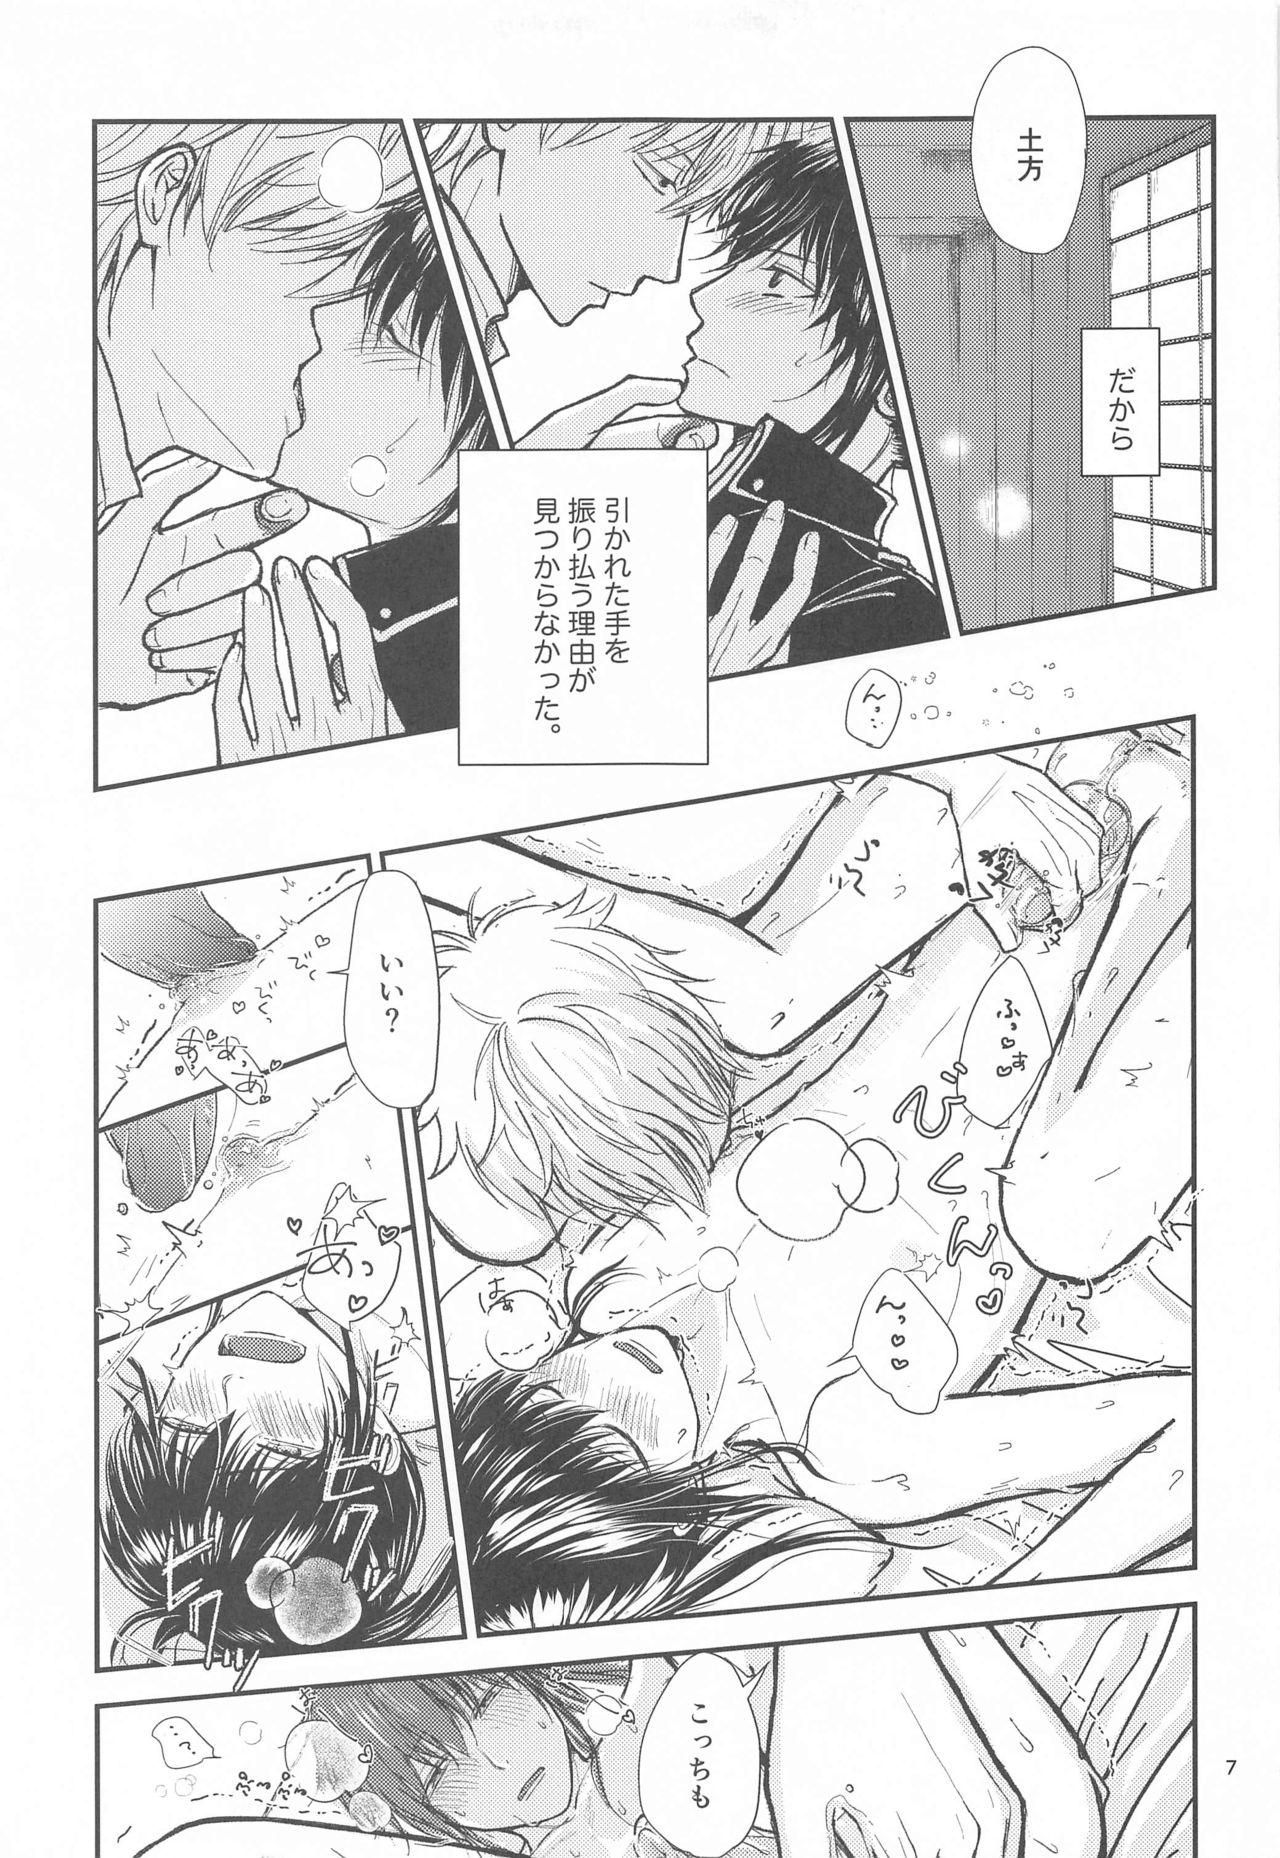 Large unconditional love - Gintama Style - Page 8